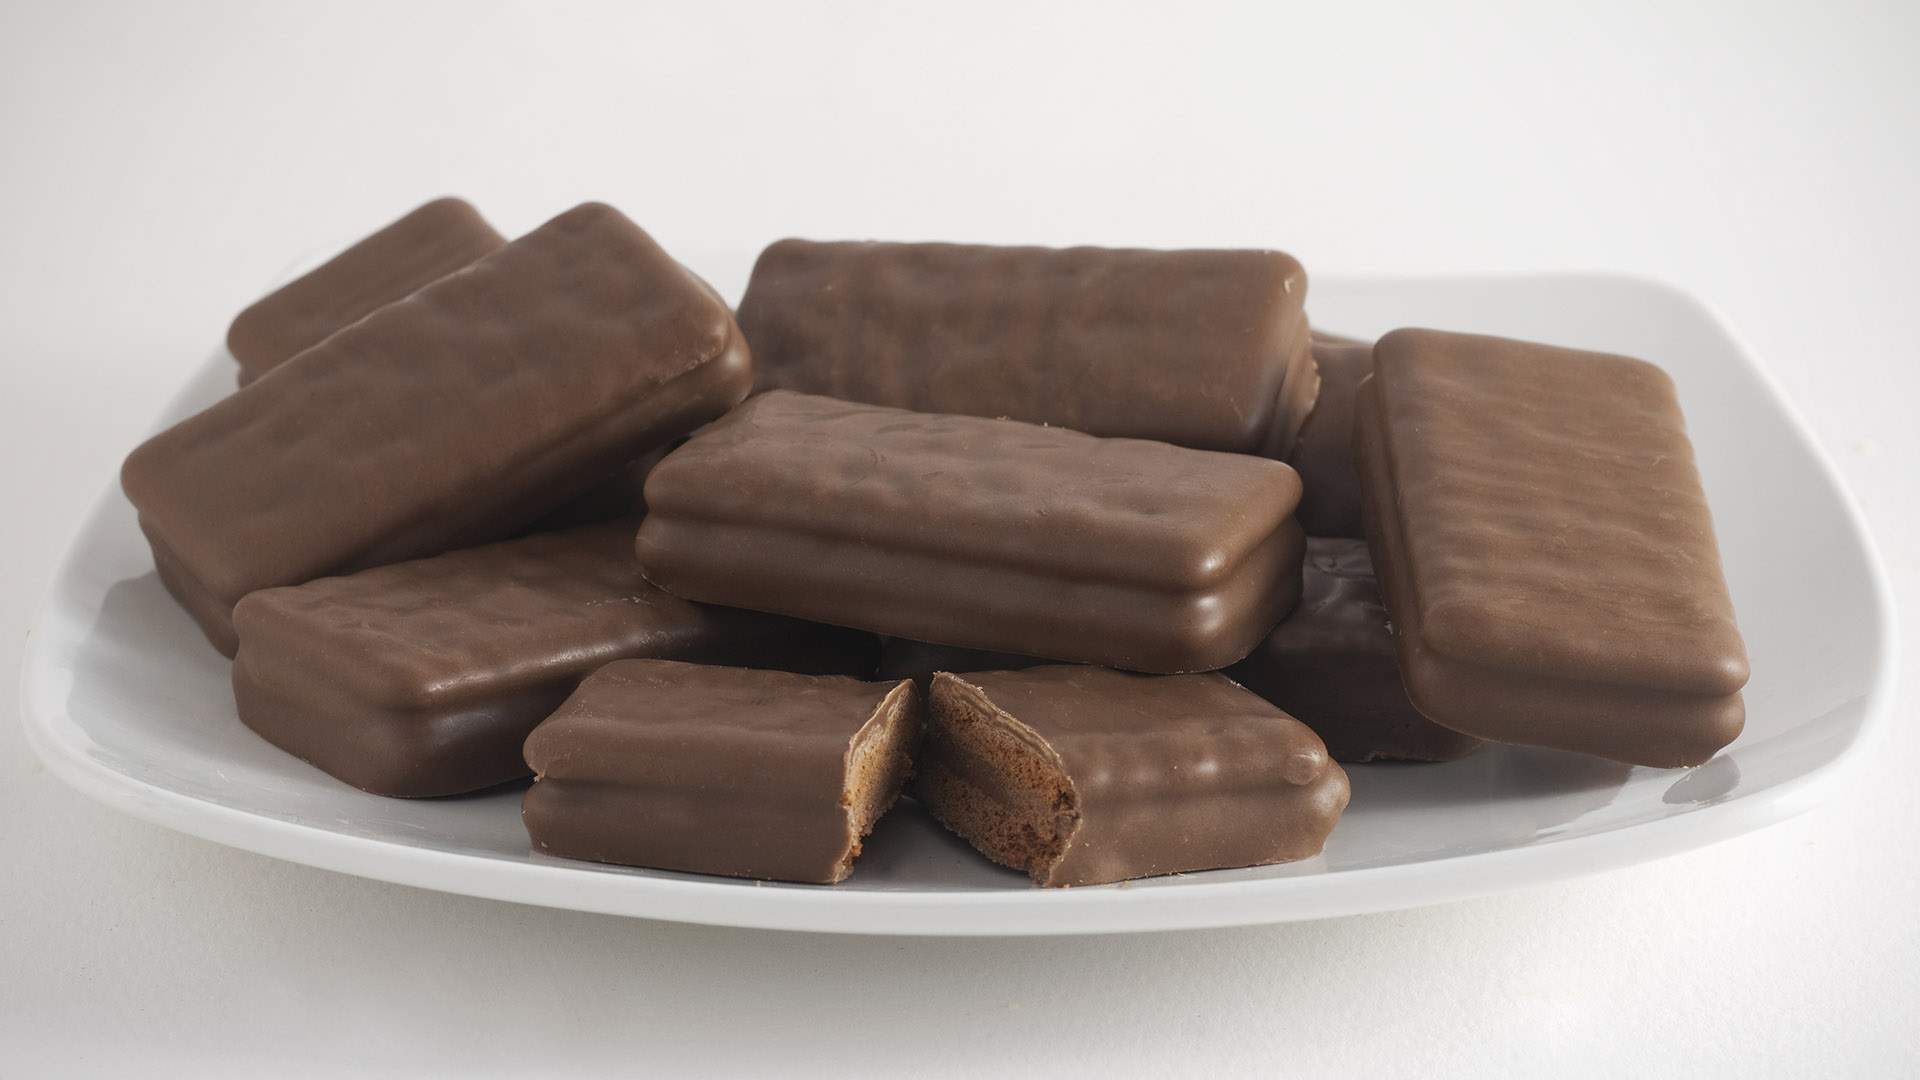 Deliveroo Is Giving Away 5000 Packets of Tim Tams with Its Deliveries for One Day Only